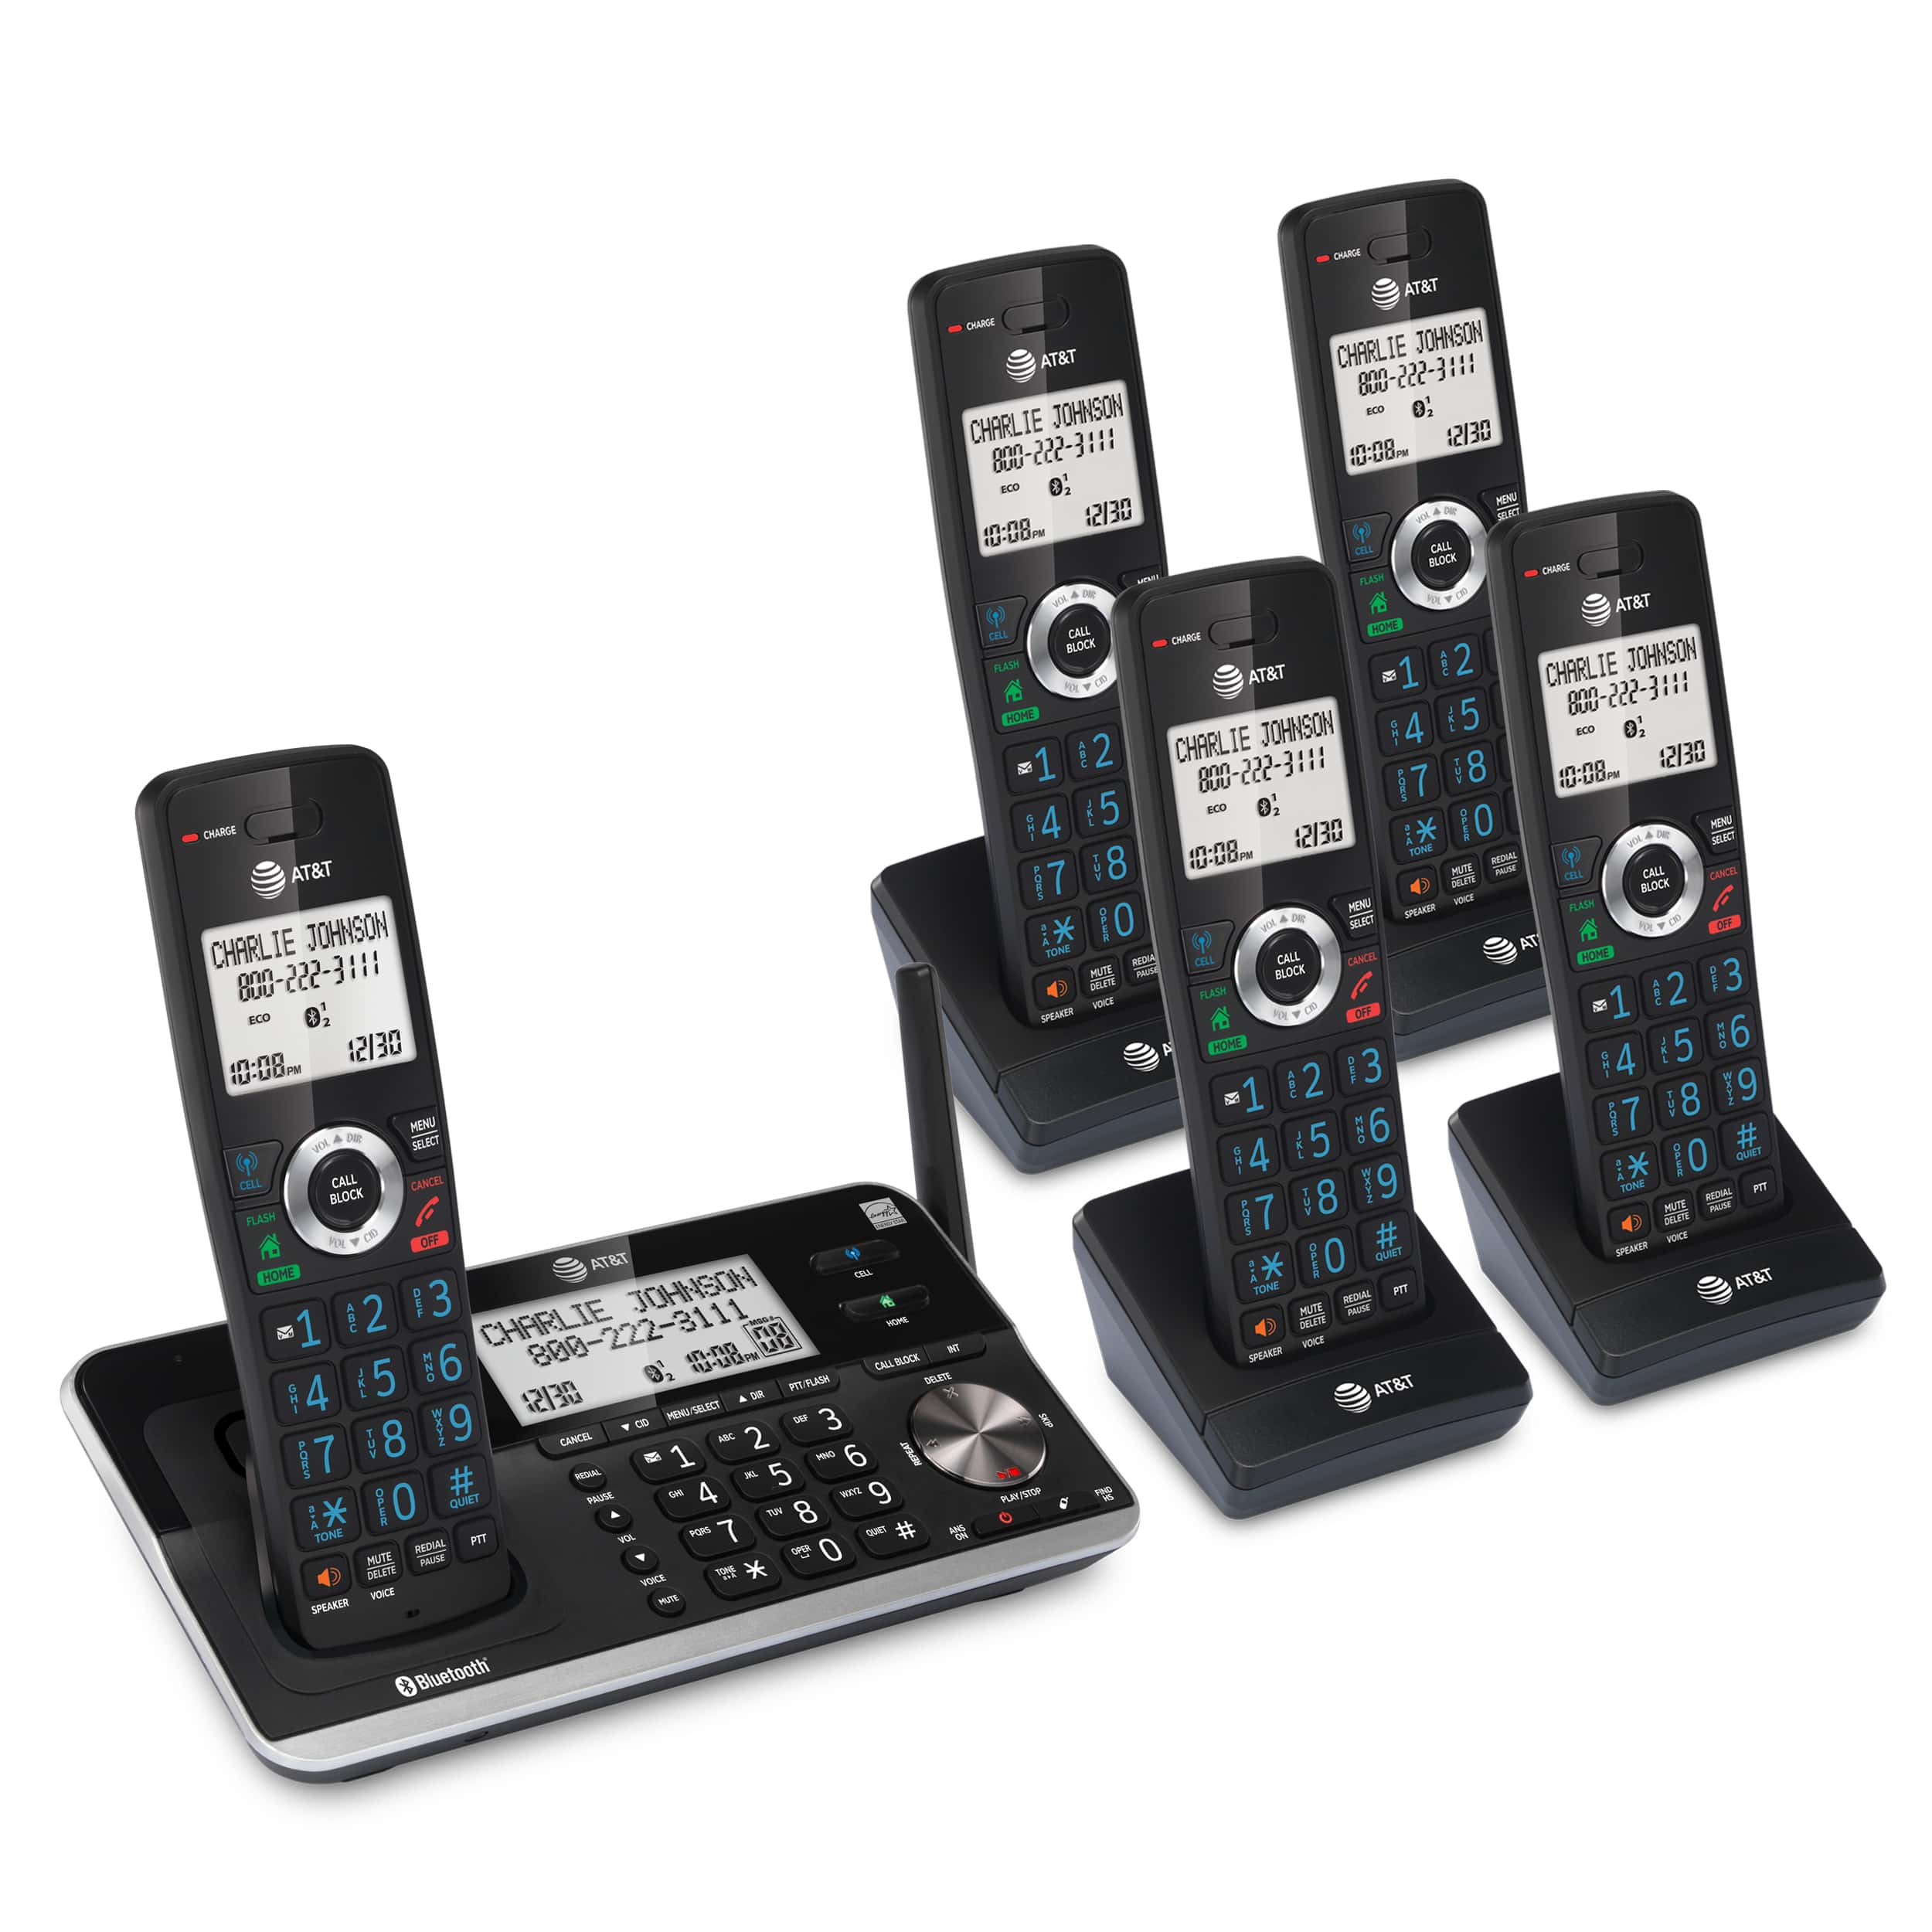 5-Handset Expandable Cordless Phone with Unsurpassed Range, Bluetooth Connect to Cell™, Smart Call Blocker and Answering System, DLP73510 - view 3